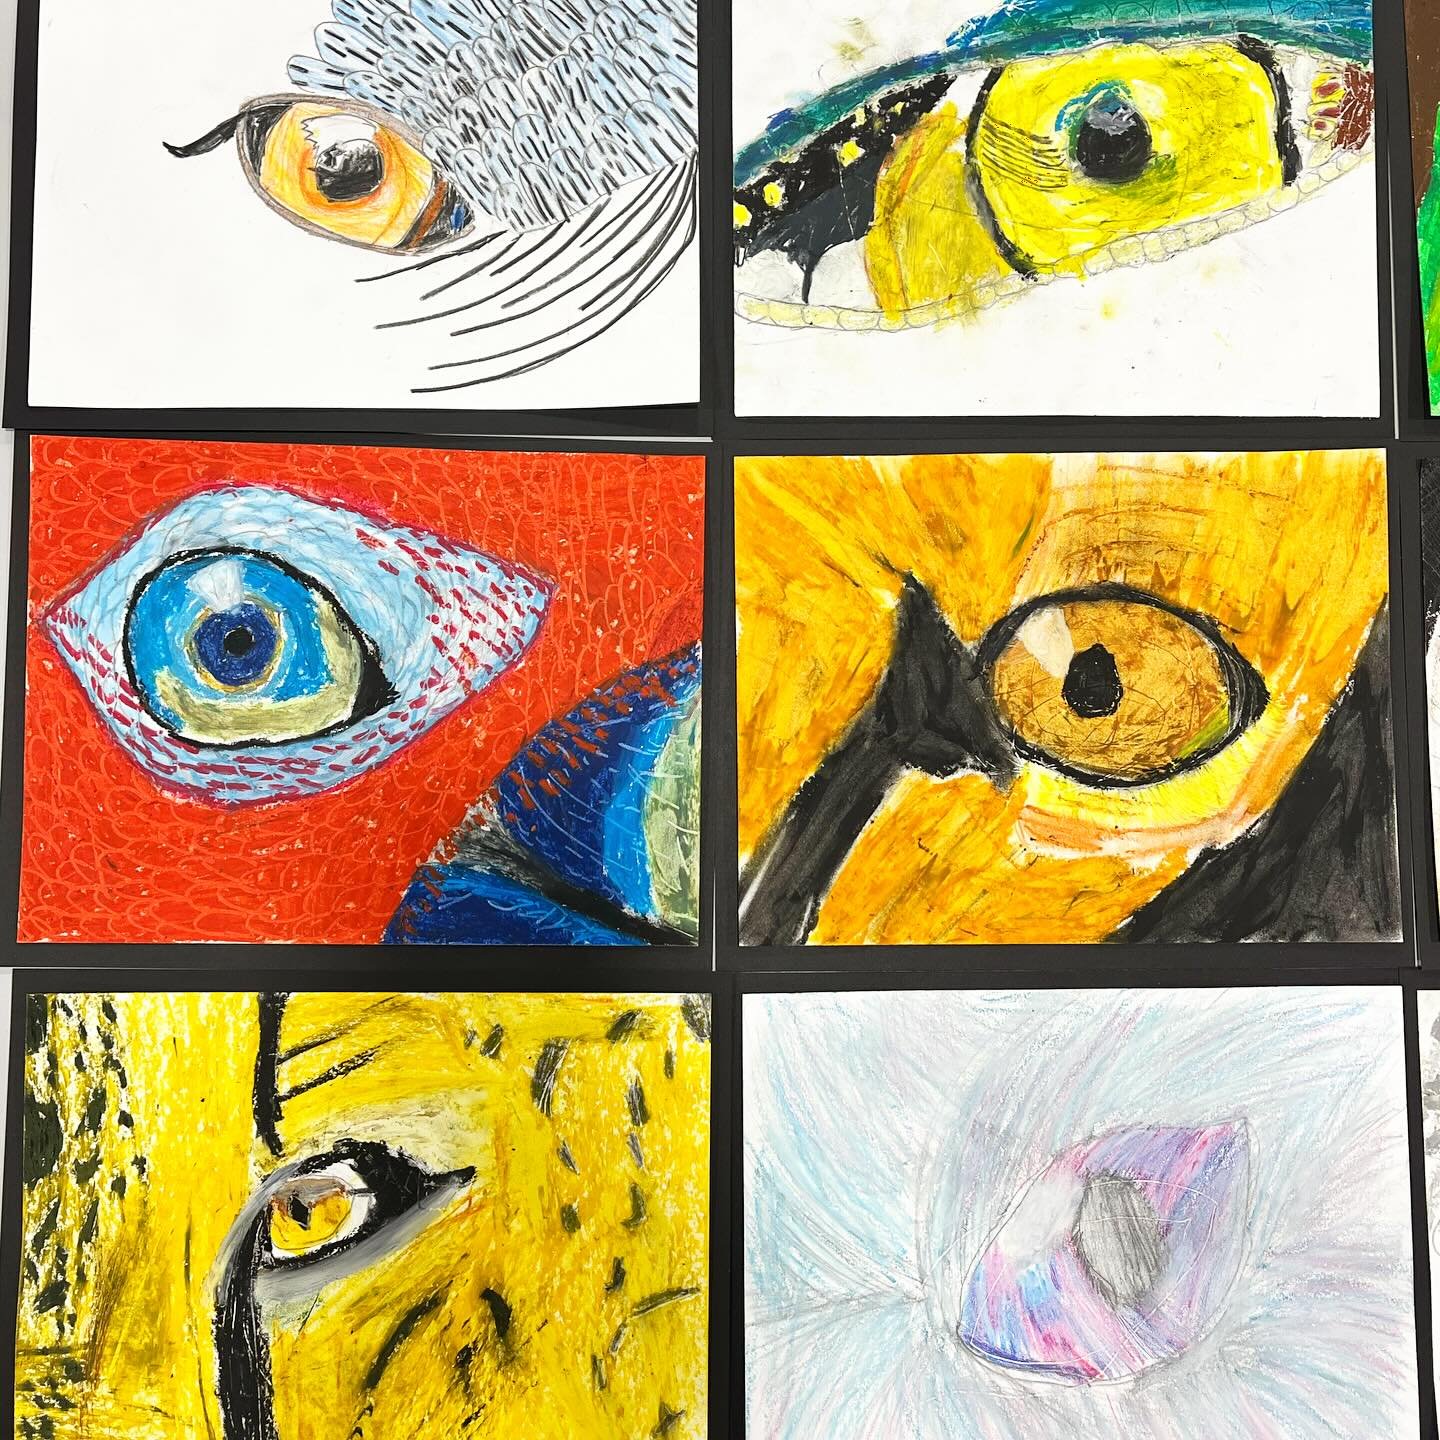 Looking very closely&hellip; 👁️ &hellip;drawing the details, every whisker, hair, and feather! Another Spring Break Art Camp project from our &ldquo;Into The Wild&rdquo; week: Campers chose a close-up photo of an animal eye and recreated it with col